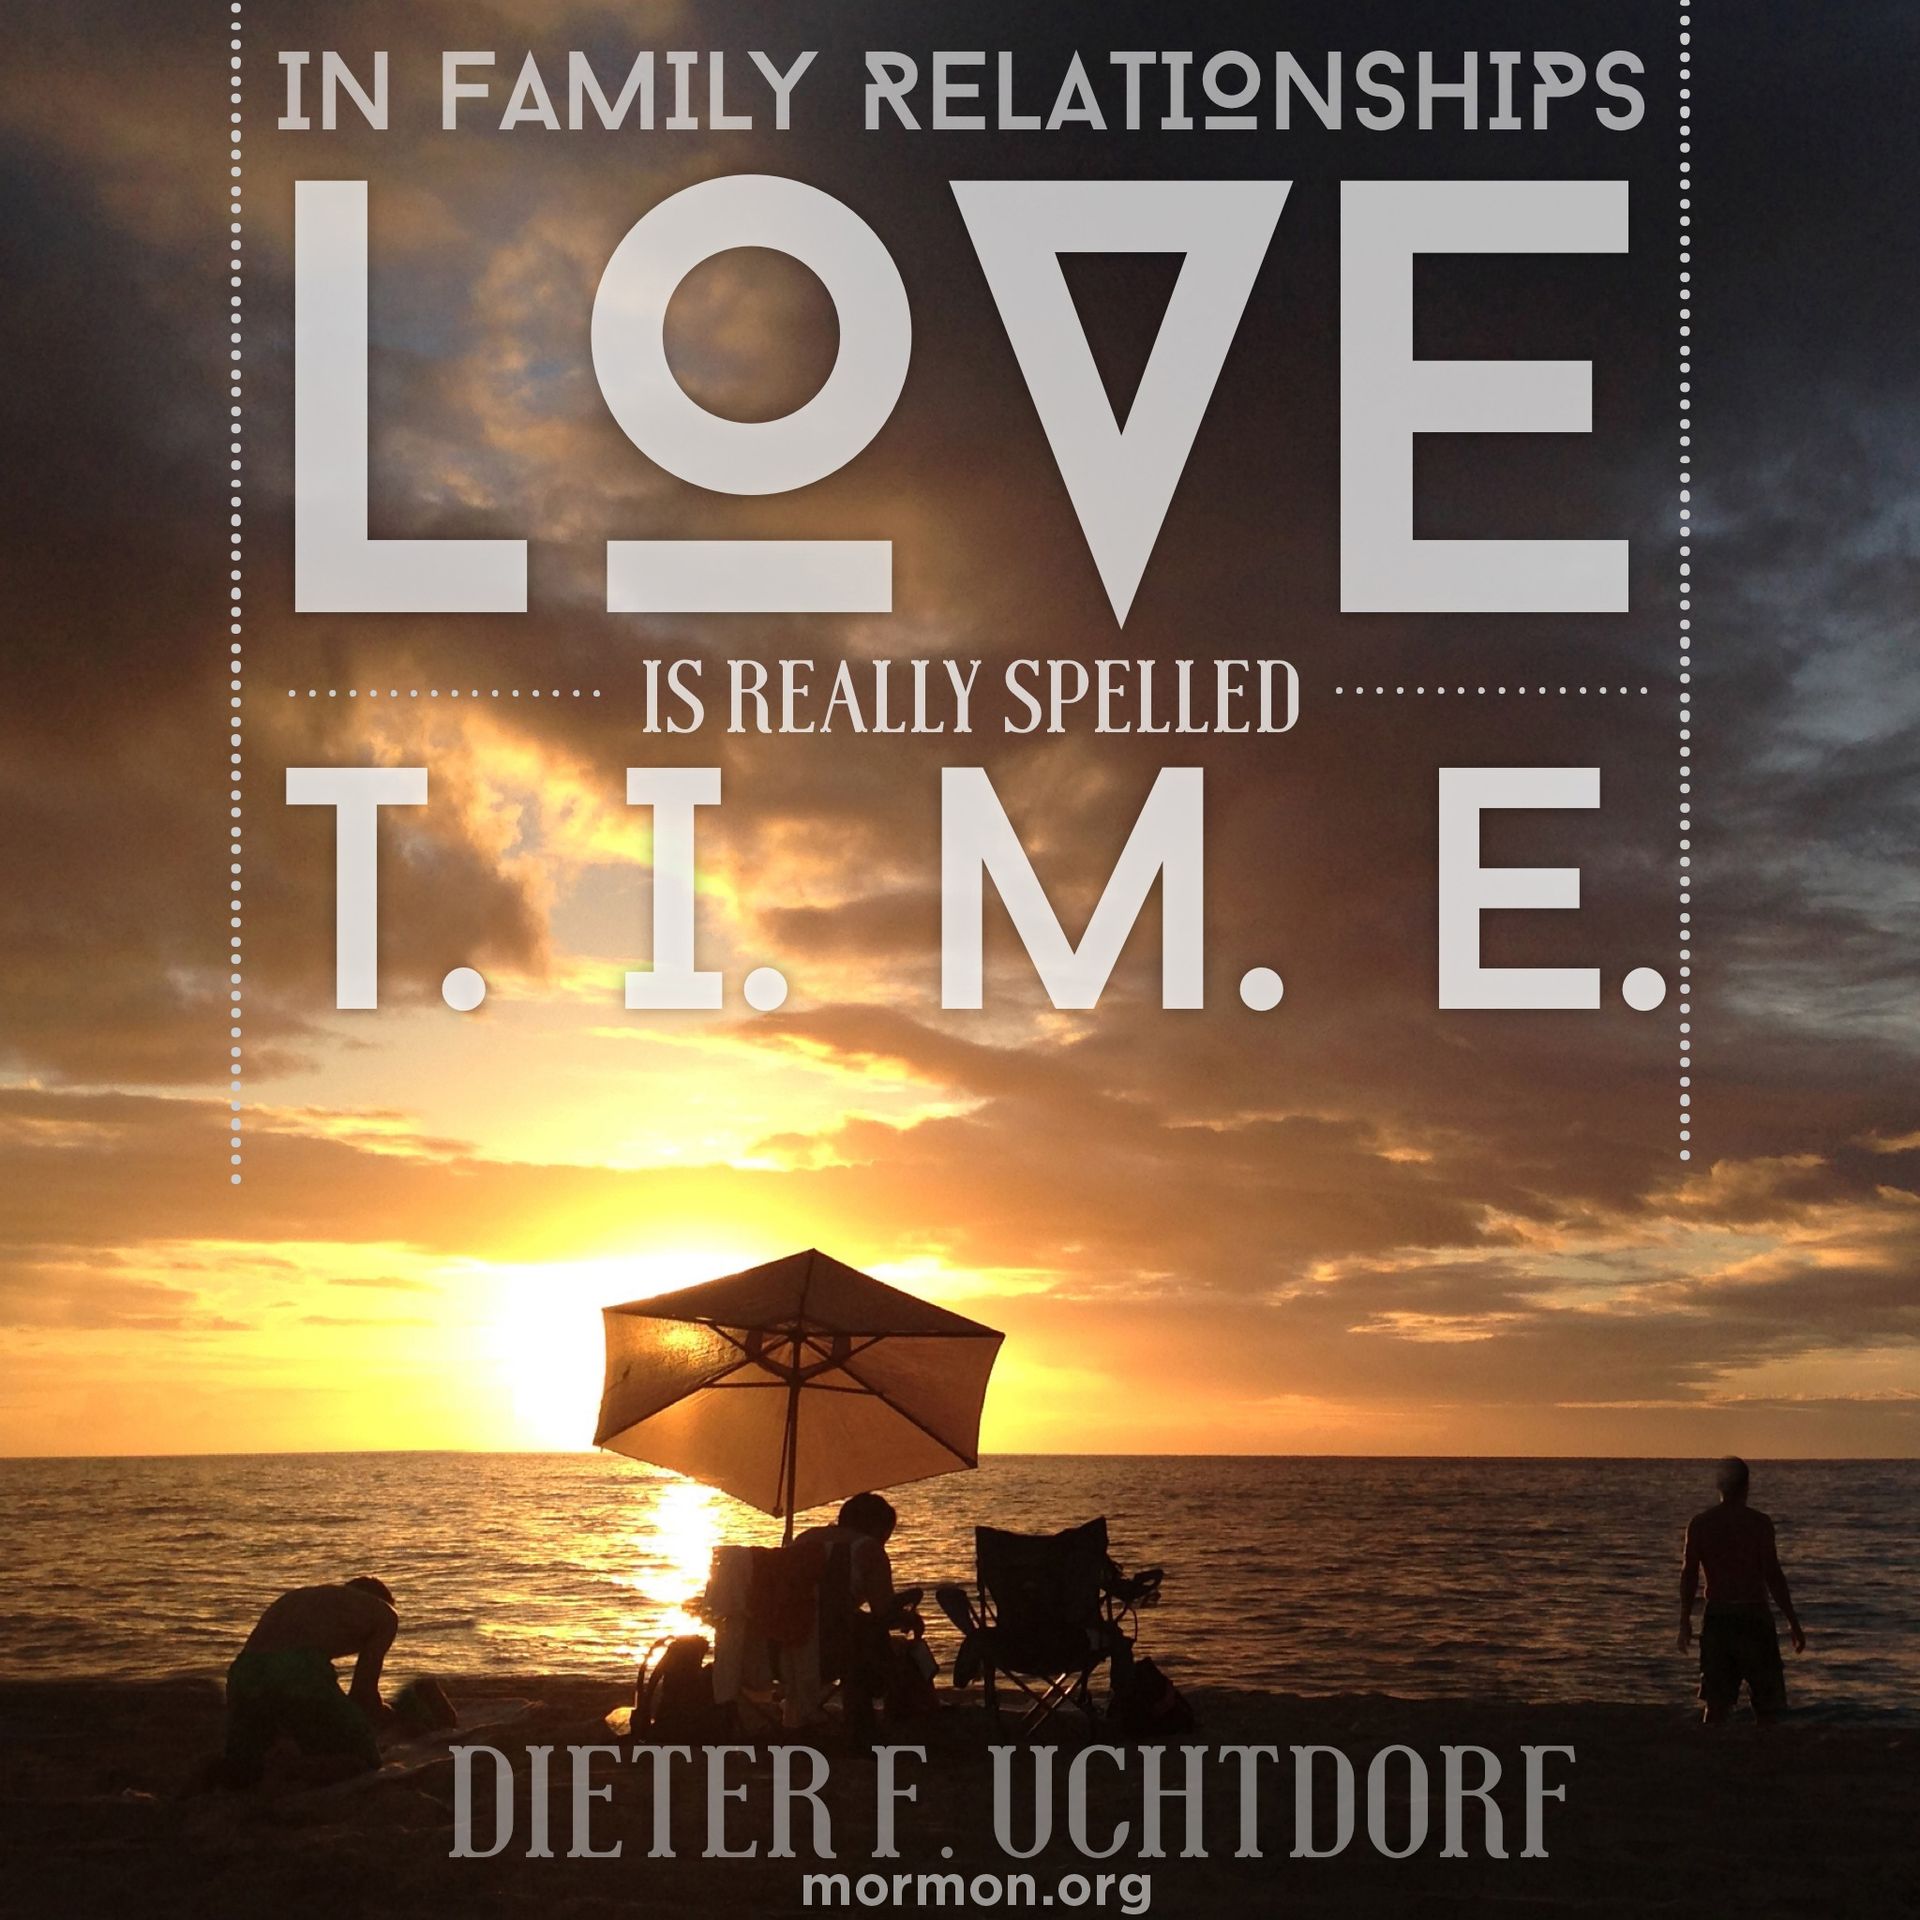 “In family relationships love is really spelled t-i-m-e.”—President Dieter F. Uchtdorf, “Of Things That Matter Most”